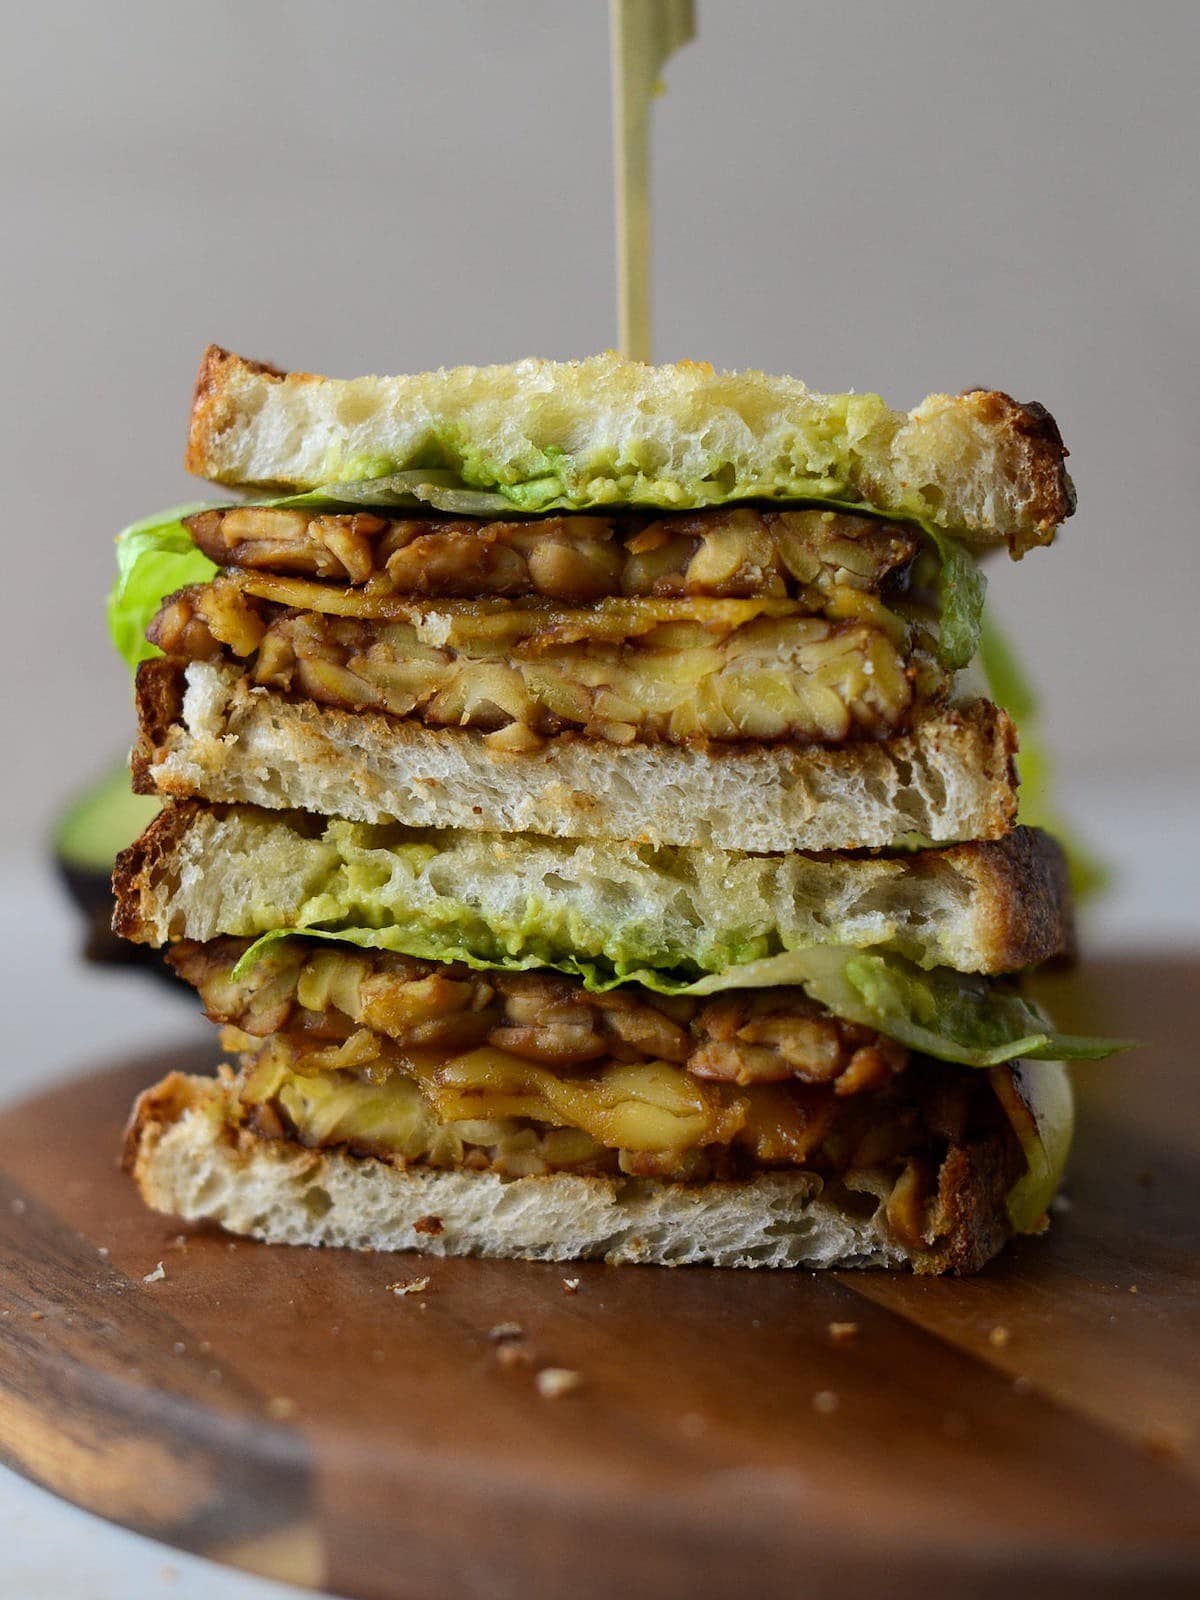 This is a photo of the tempeh sandwich (cross section of the inside).